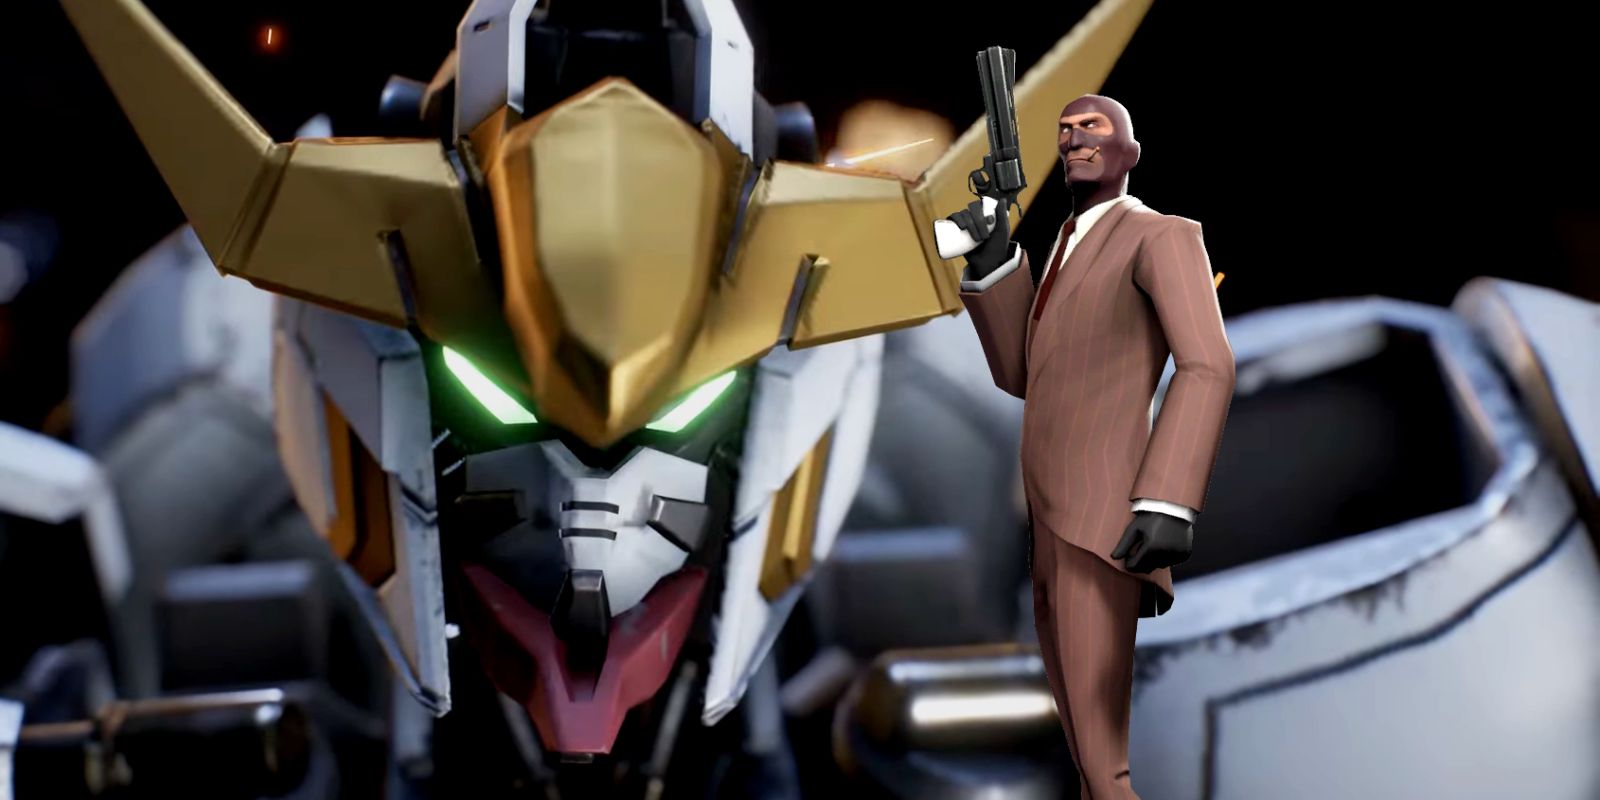 Gundam Evolution Is Hiding A Spy From Team Fortress 2